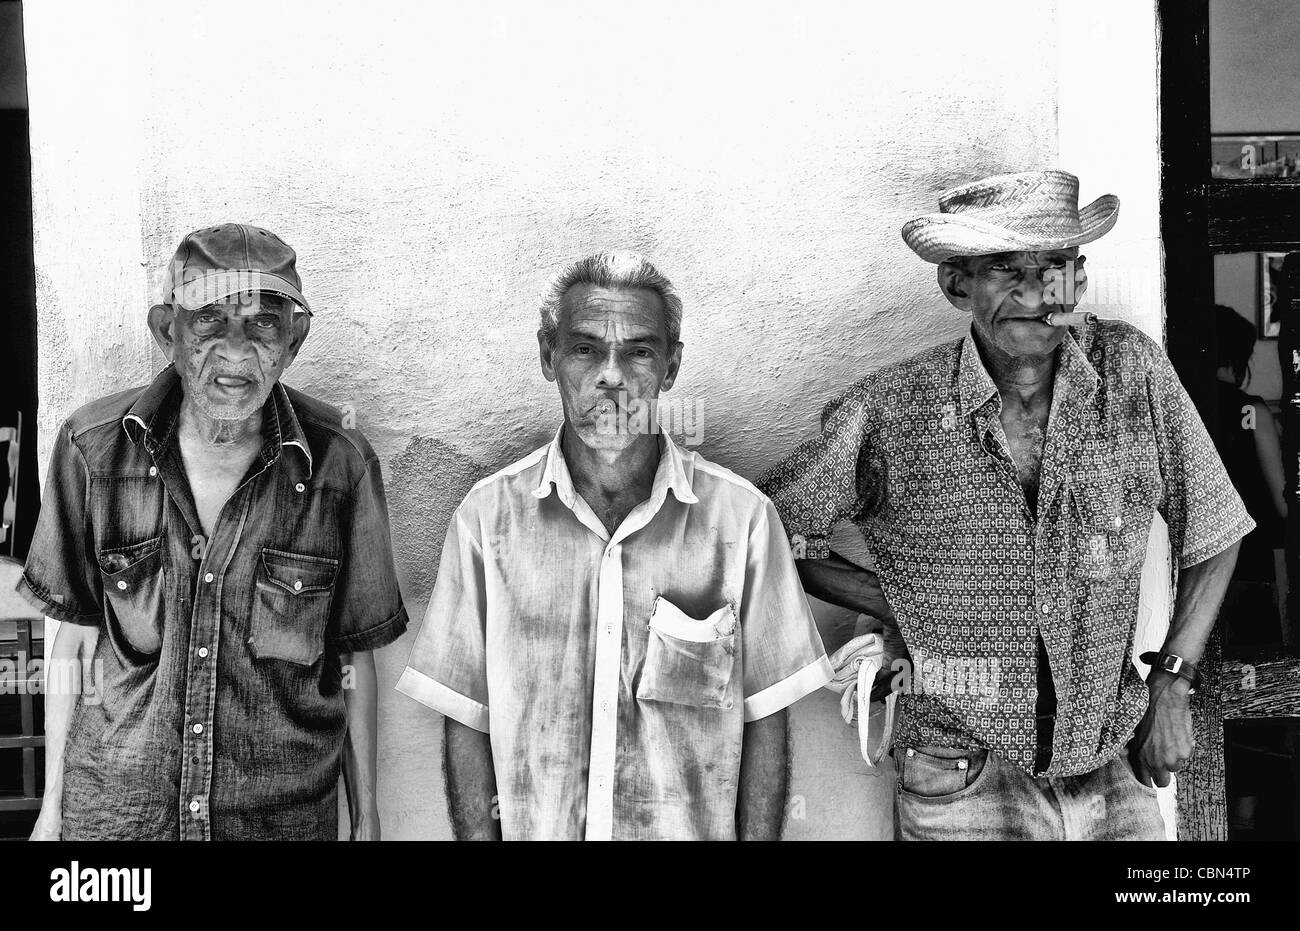 Local old men with cigar against bright yellow wall of building of the old colonial city of Trinidad in Cuba Stock Photo